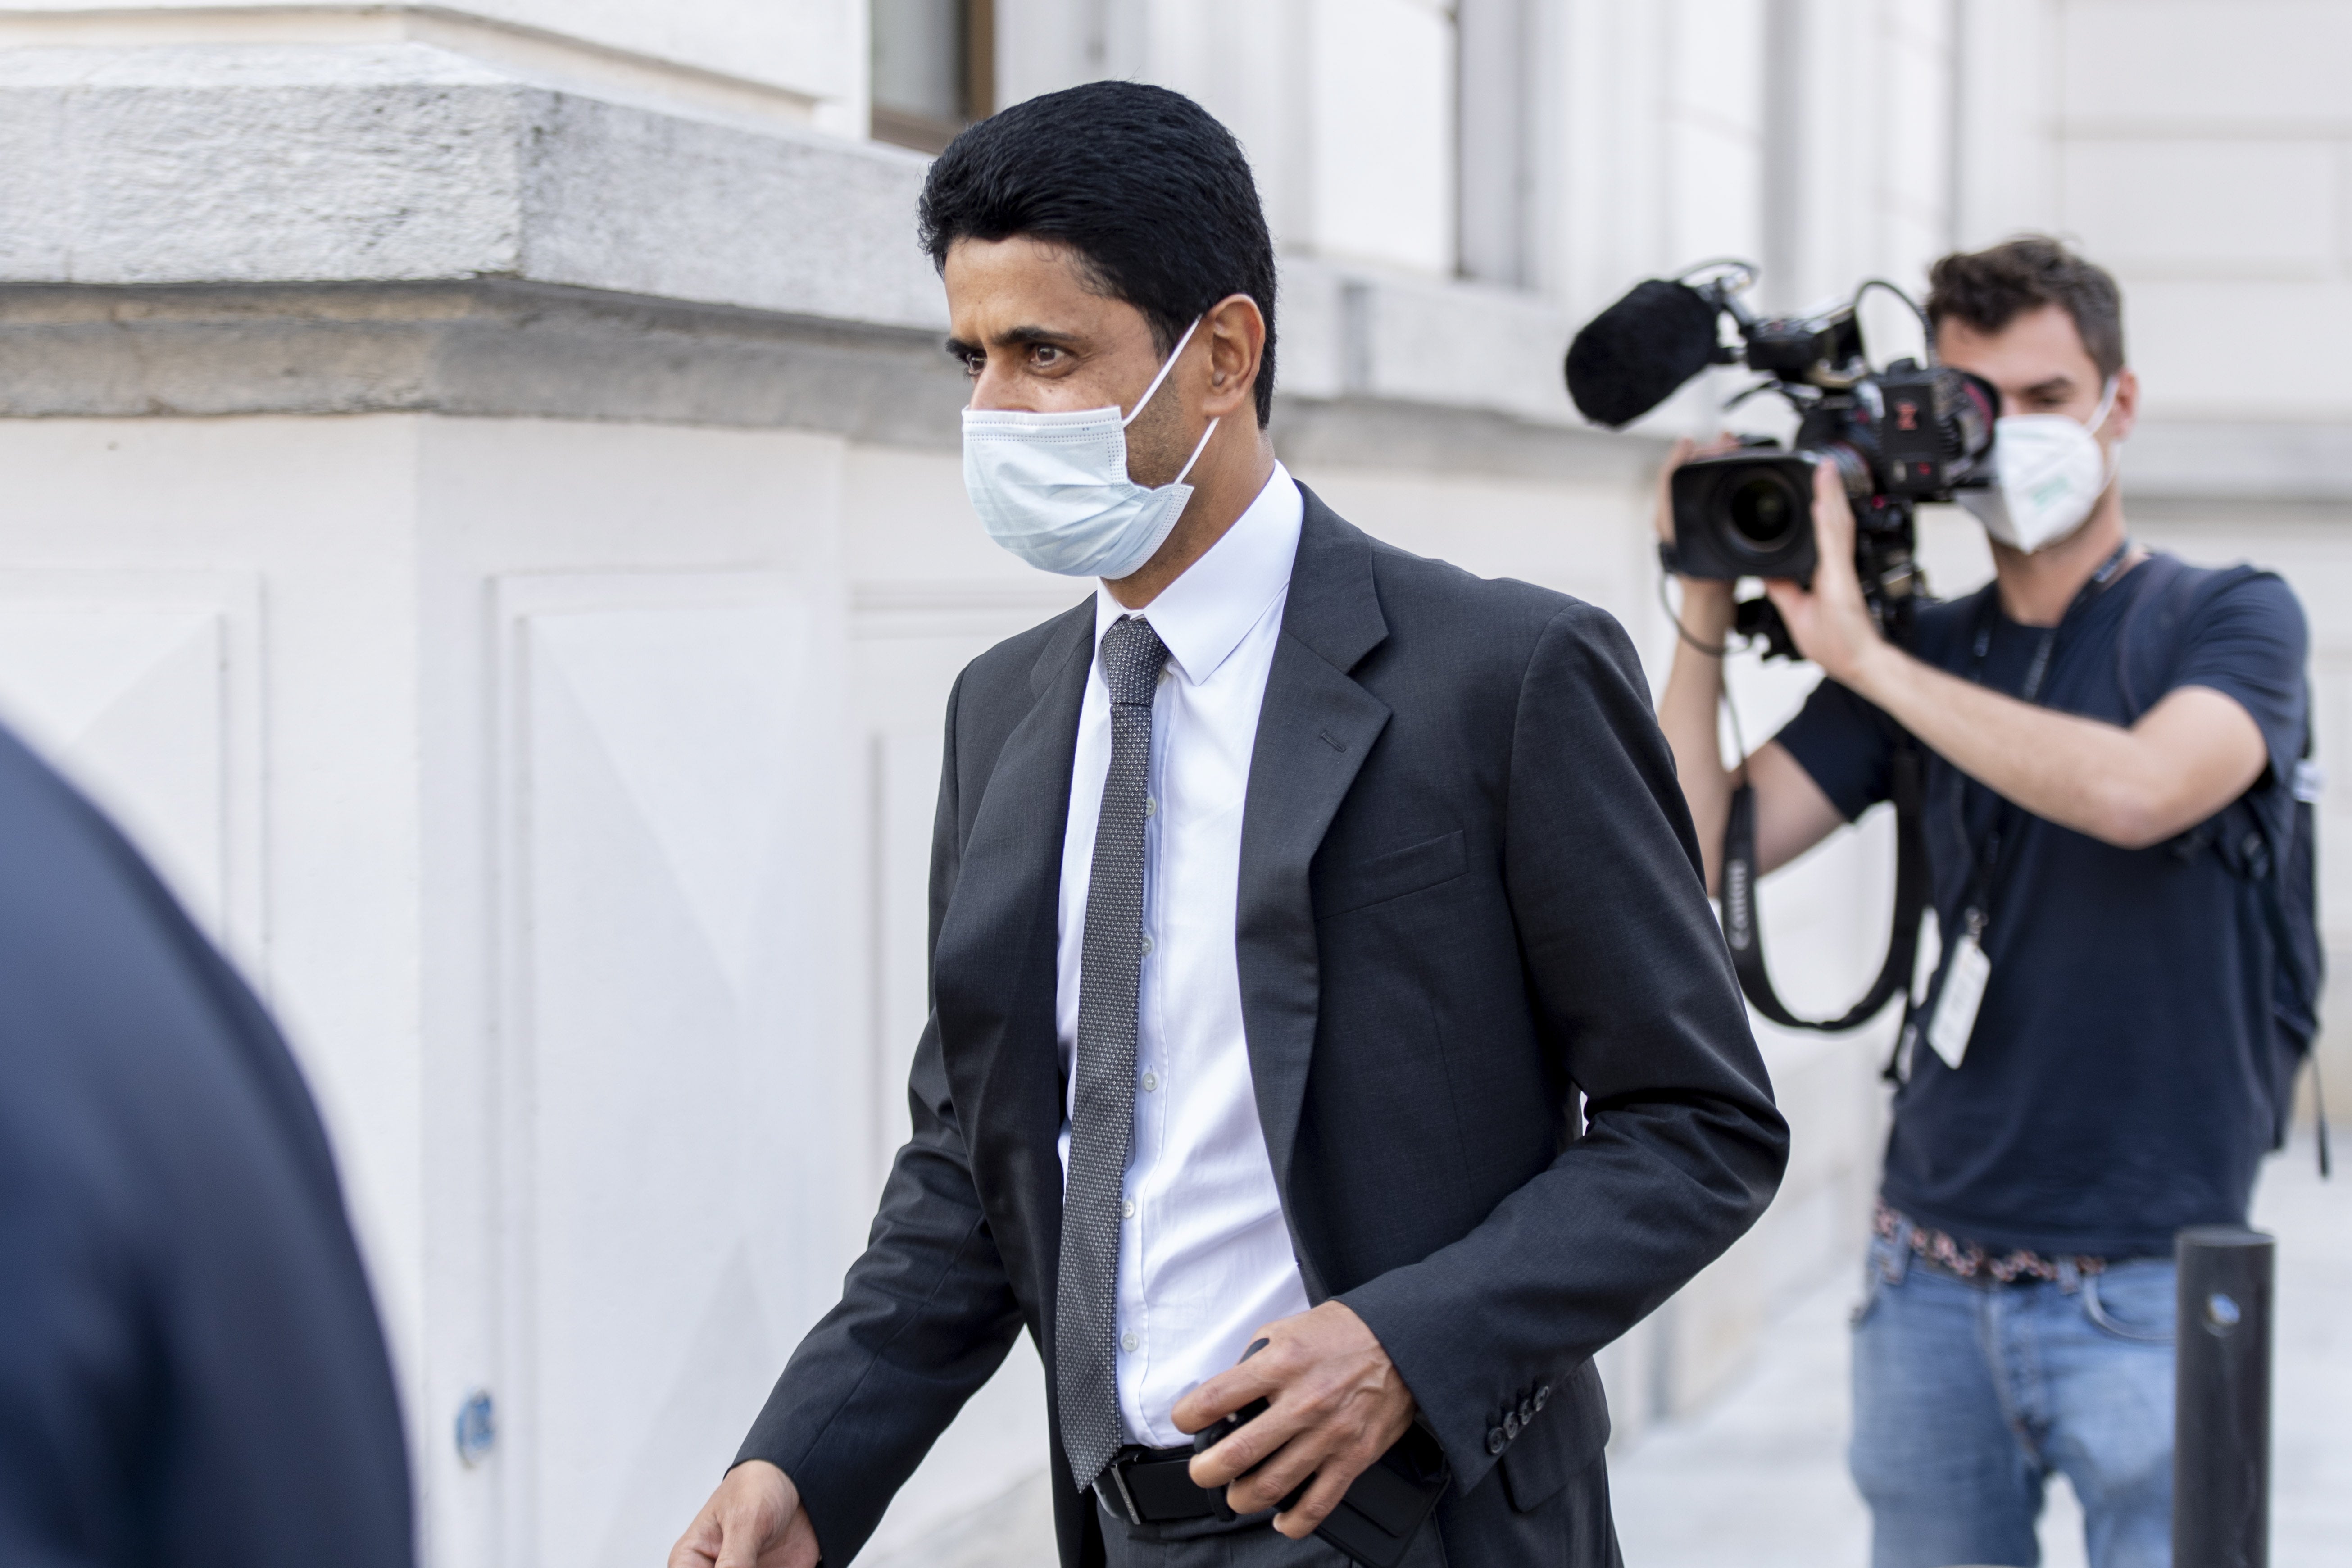 Nasser al-Khelaifi has been acquitted of criminal mismanagement in a Swiss corruption trial